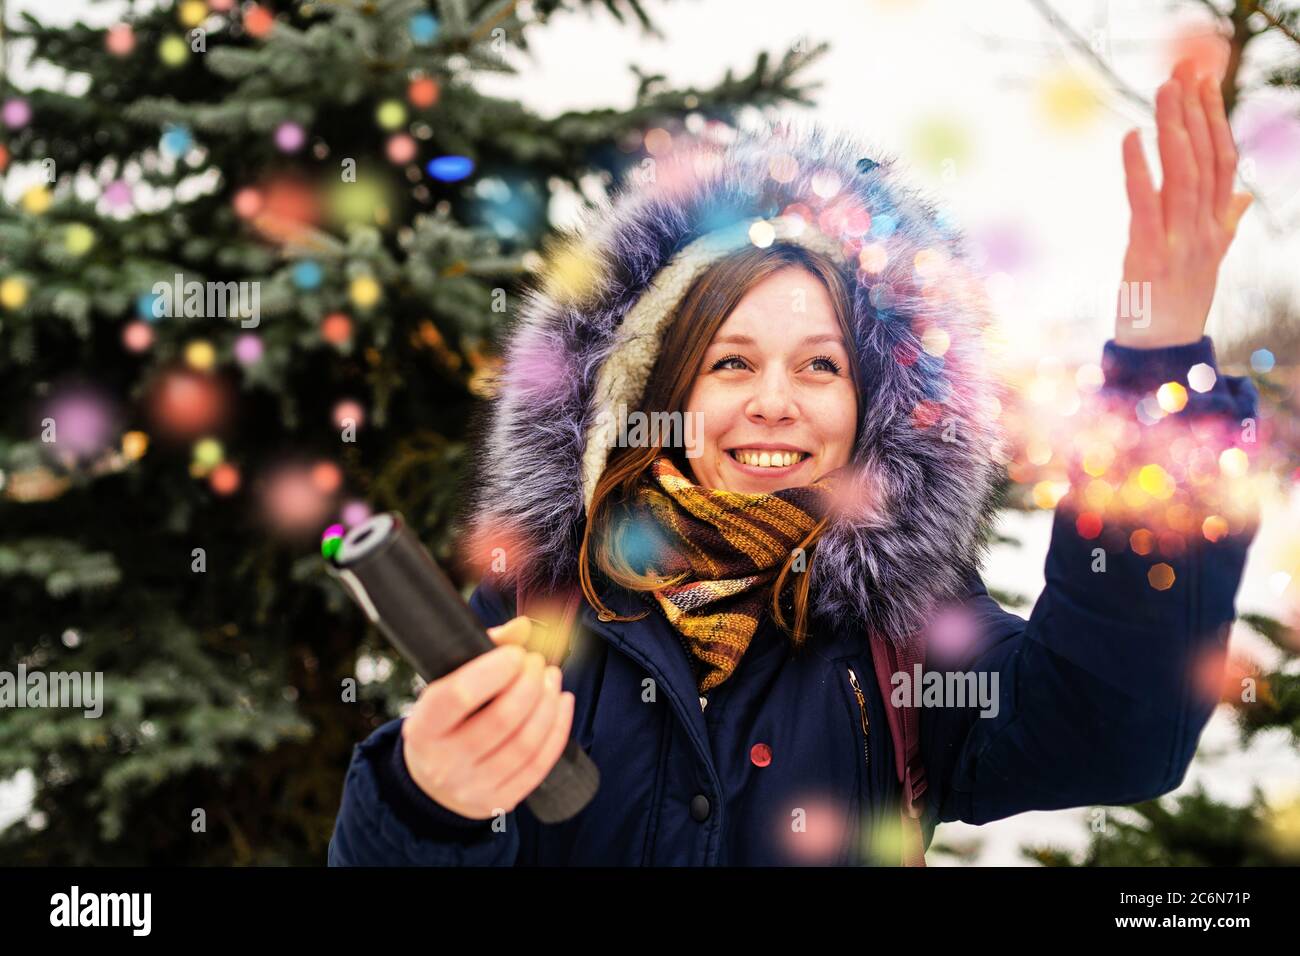 Emotional woman pops confetti petard and smiles with delight. Adult female in hooded jacket admires and reaches out to confetti while standing near Stock Photo